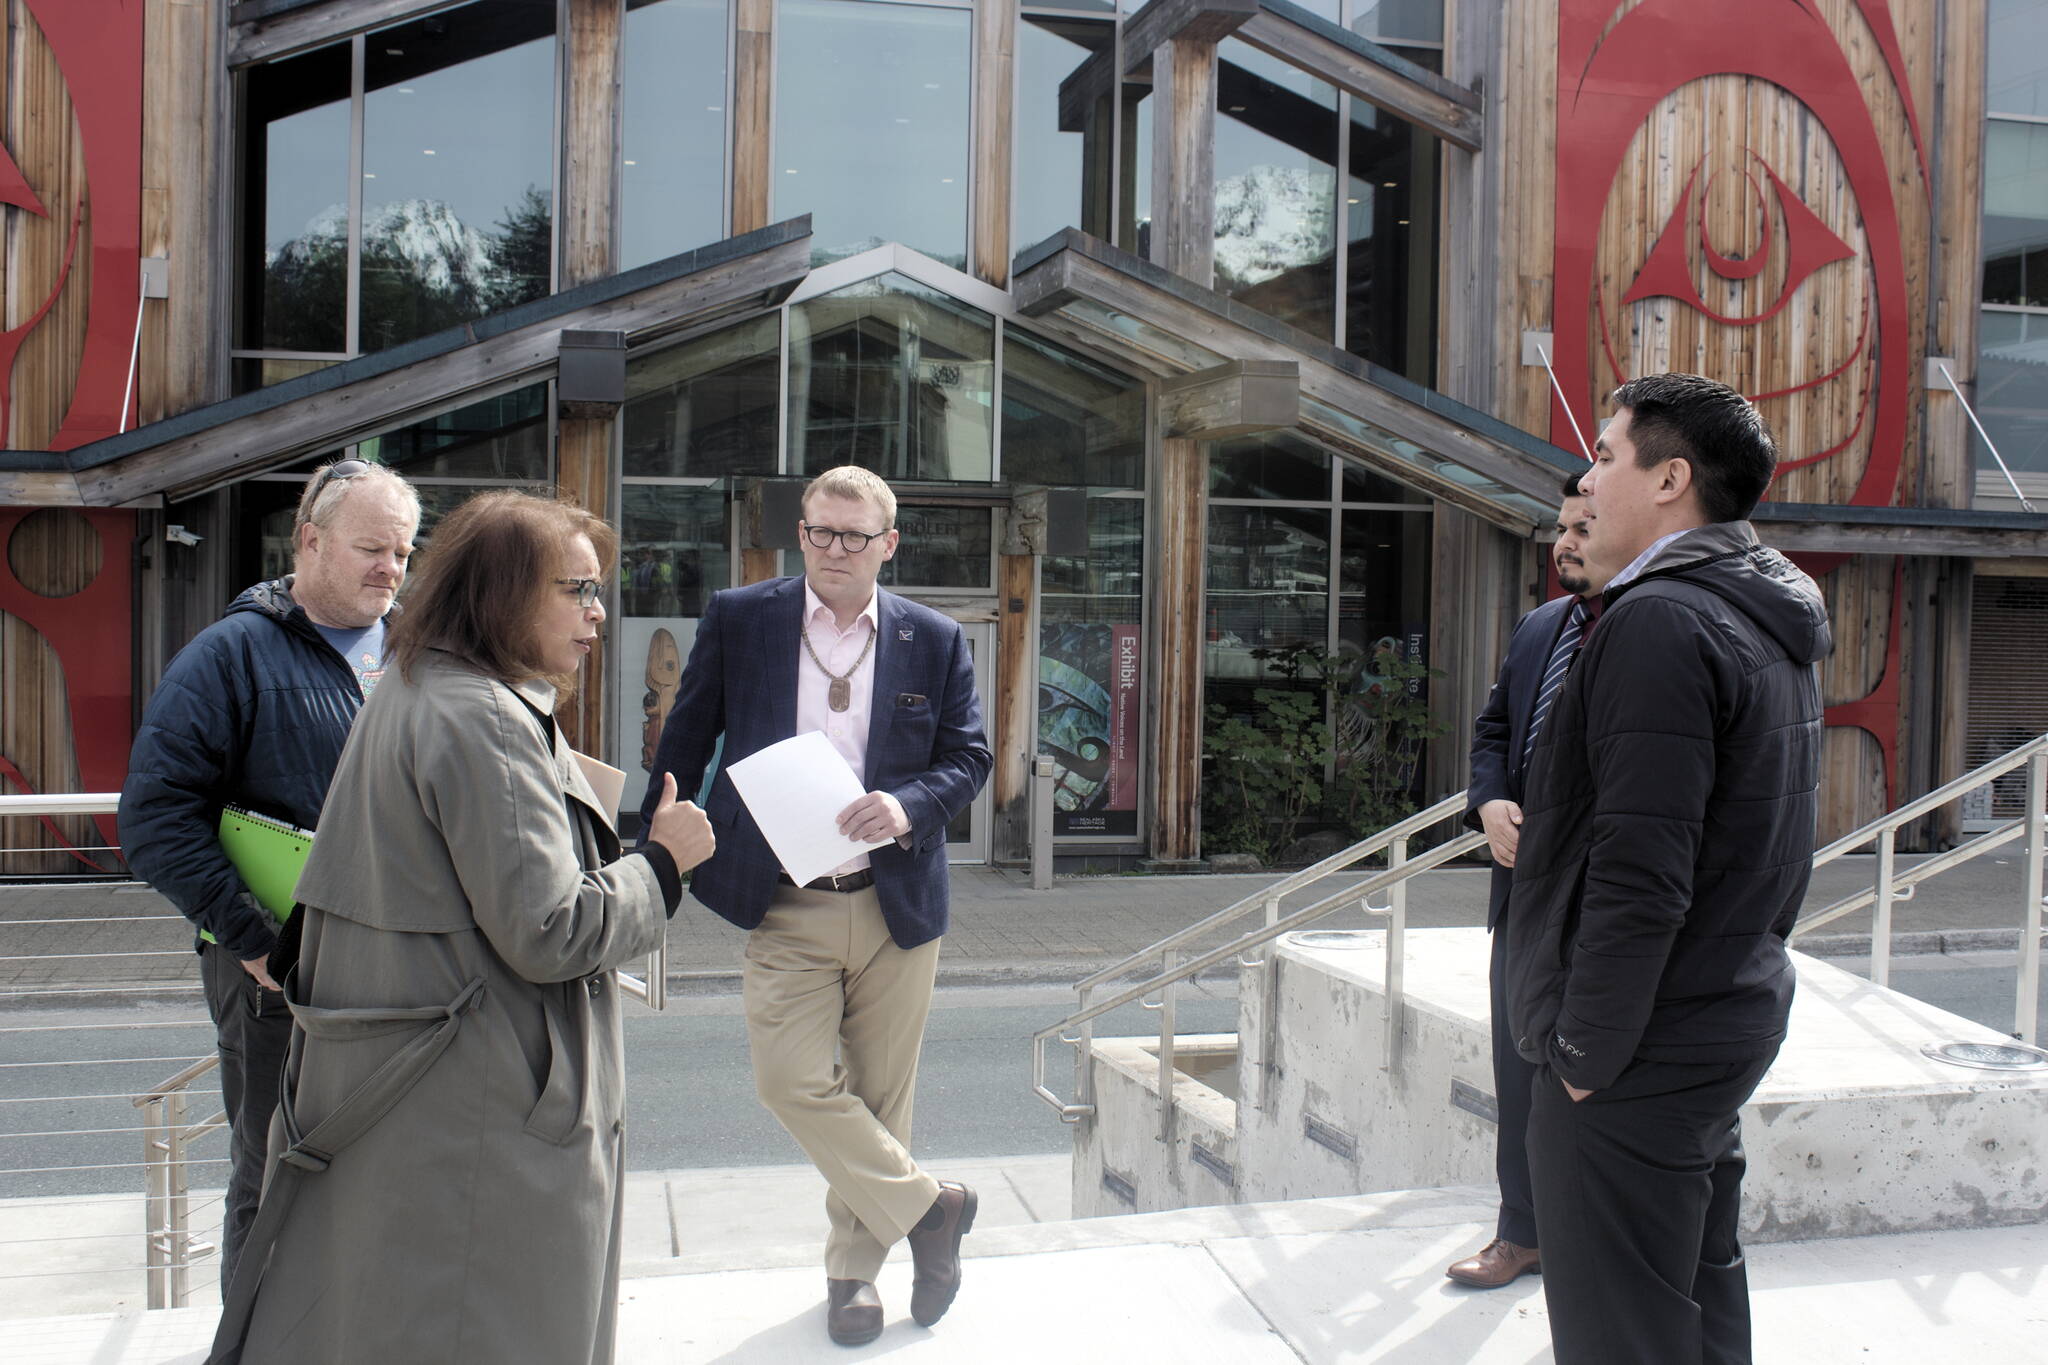 Assistant U.S. Commerce Secretary Alejandra Castillo, second from left, meets Southeast Alaska Native leaders at the Sealaska Heritage Plaza on Wednesday to discuss the Spruce Root project, which is among 60 finalists seeking a share of a $1 billion federal development grant. Spruce Roots is hoping to be among the 20-30 winners who will each receive up to $100 million, with the project seeking to create 250 new jobs, $22 million in new annual economic activity and $20 million in new infrastructure. (Mark Sabbatini / Juneau Empire)